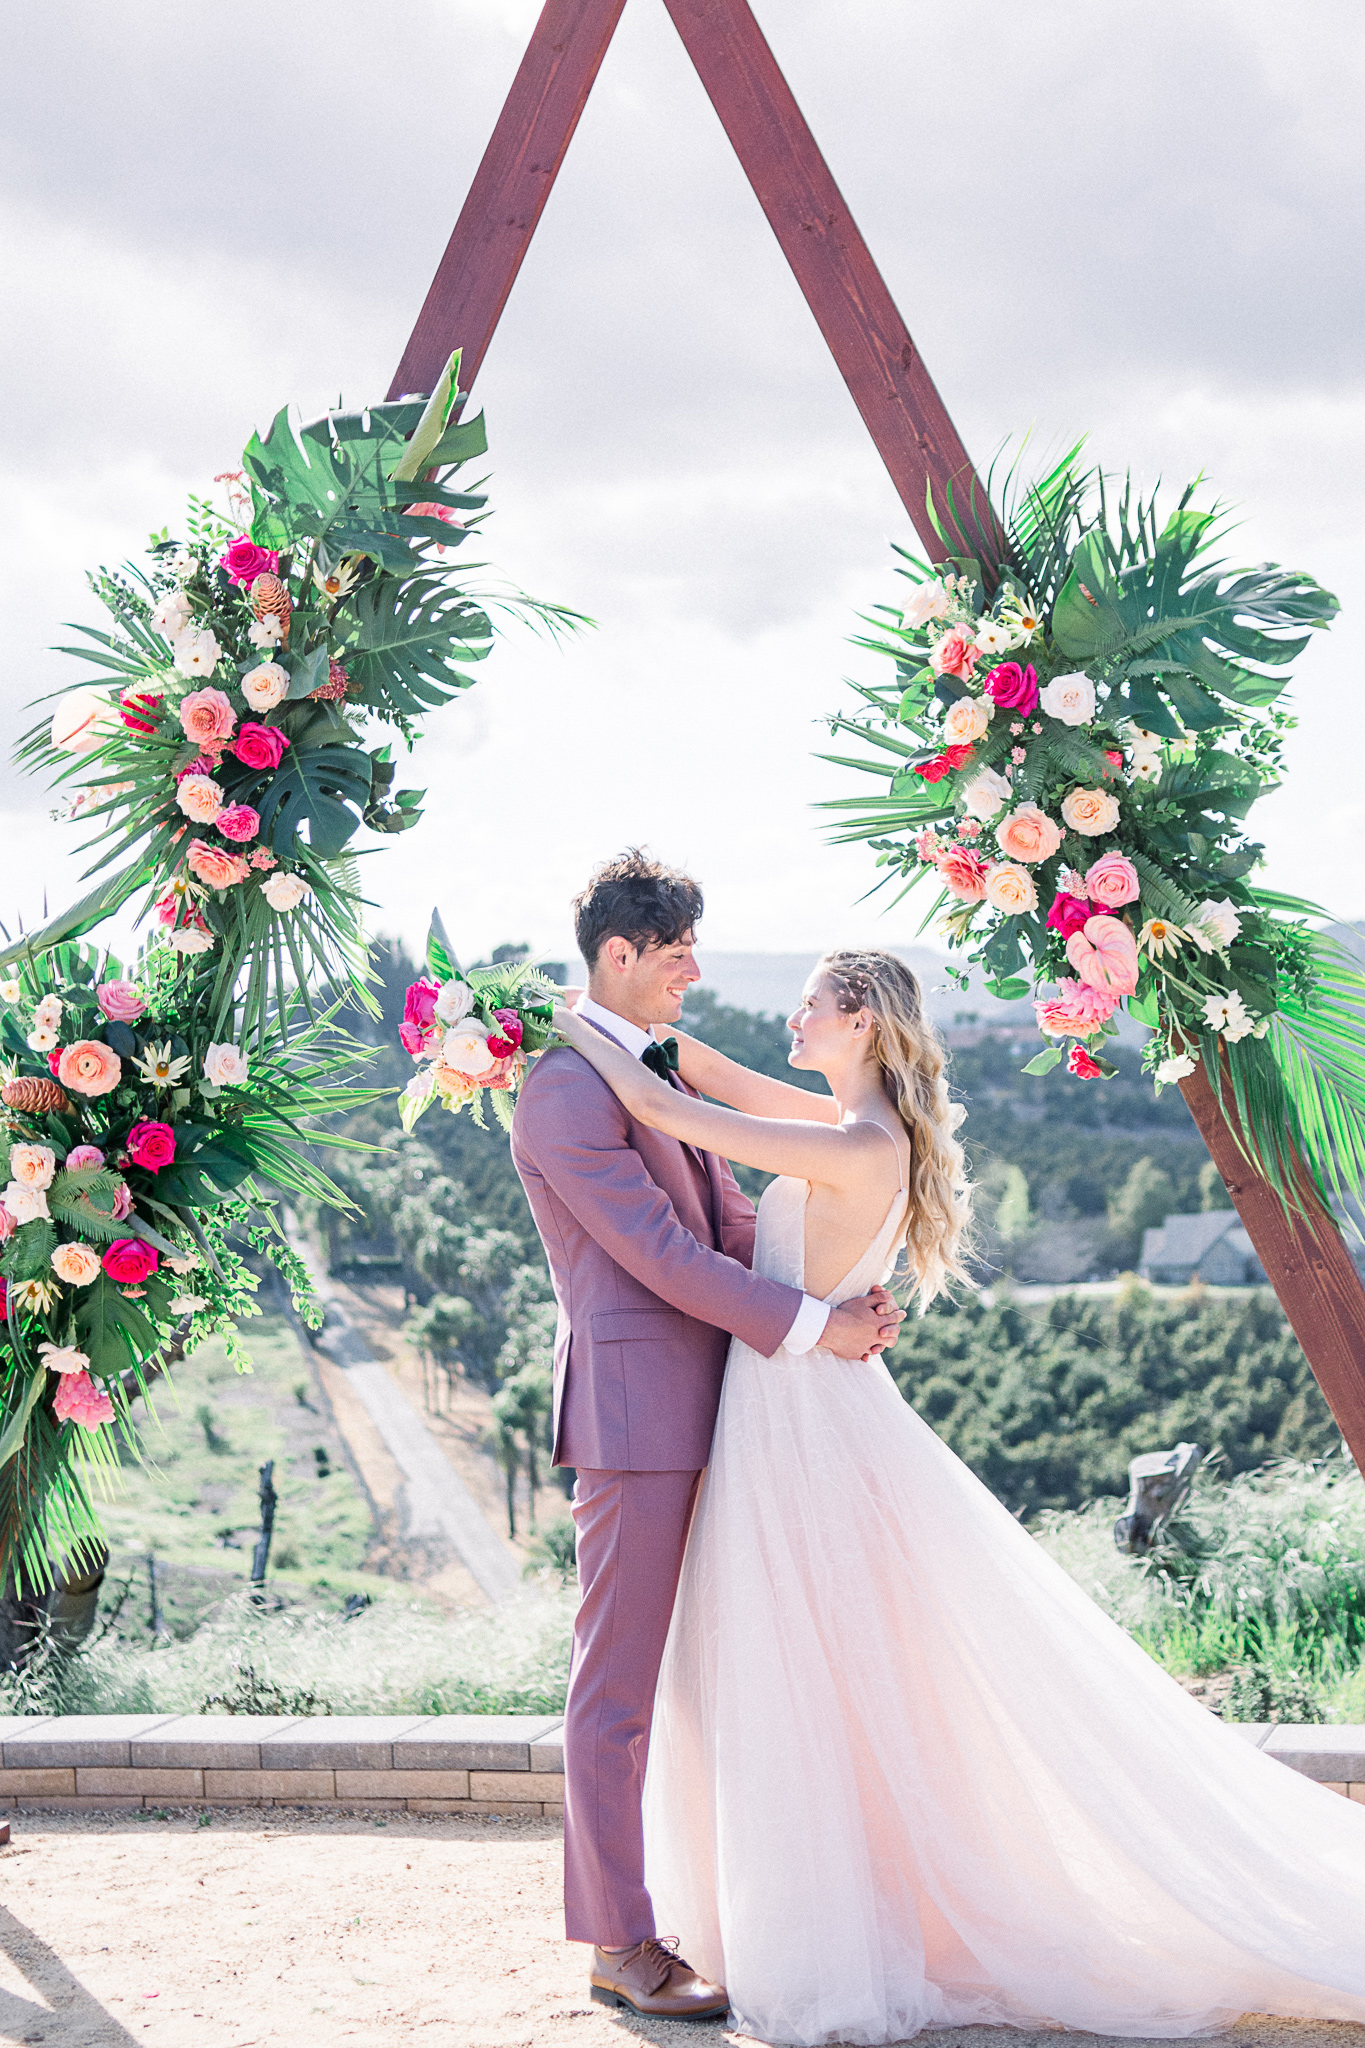 emerald-peak-temecula-wedding-bride-and-groom-looking-at-each-other-at-ceremony-arch-bride-in-a-blush-toned-tulle-ballgown-with-straps-groom-in-a-rose-pink-suit-with-a-green-velvet-bow-tie